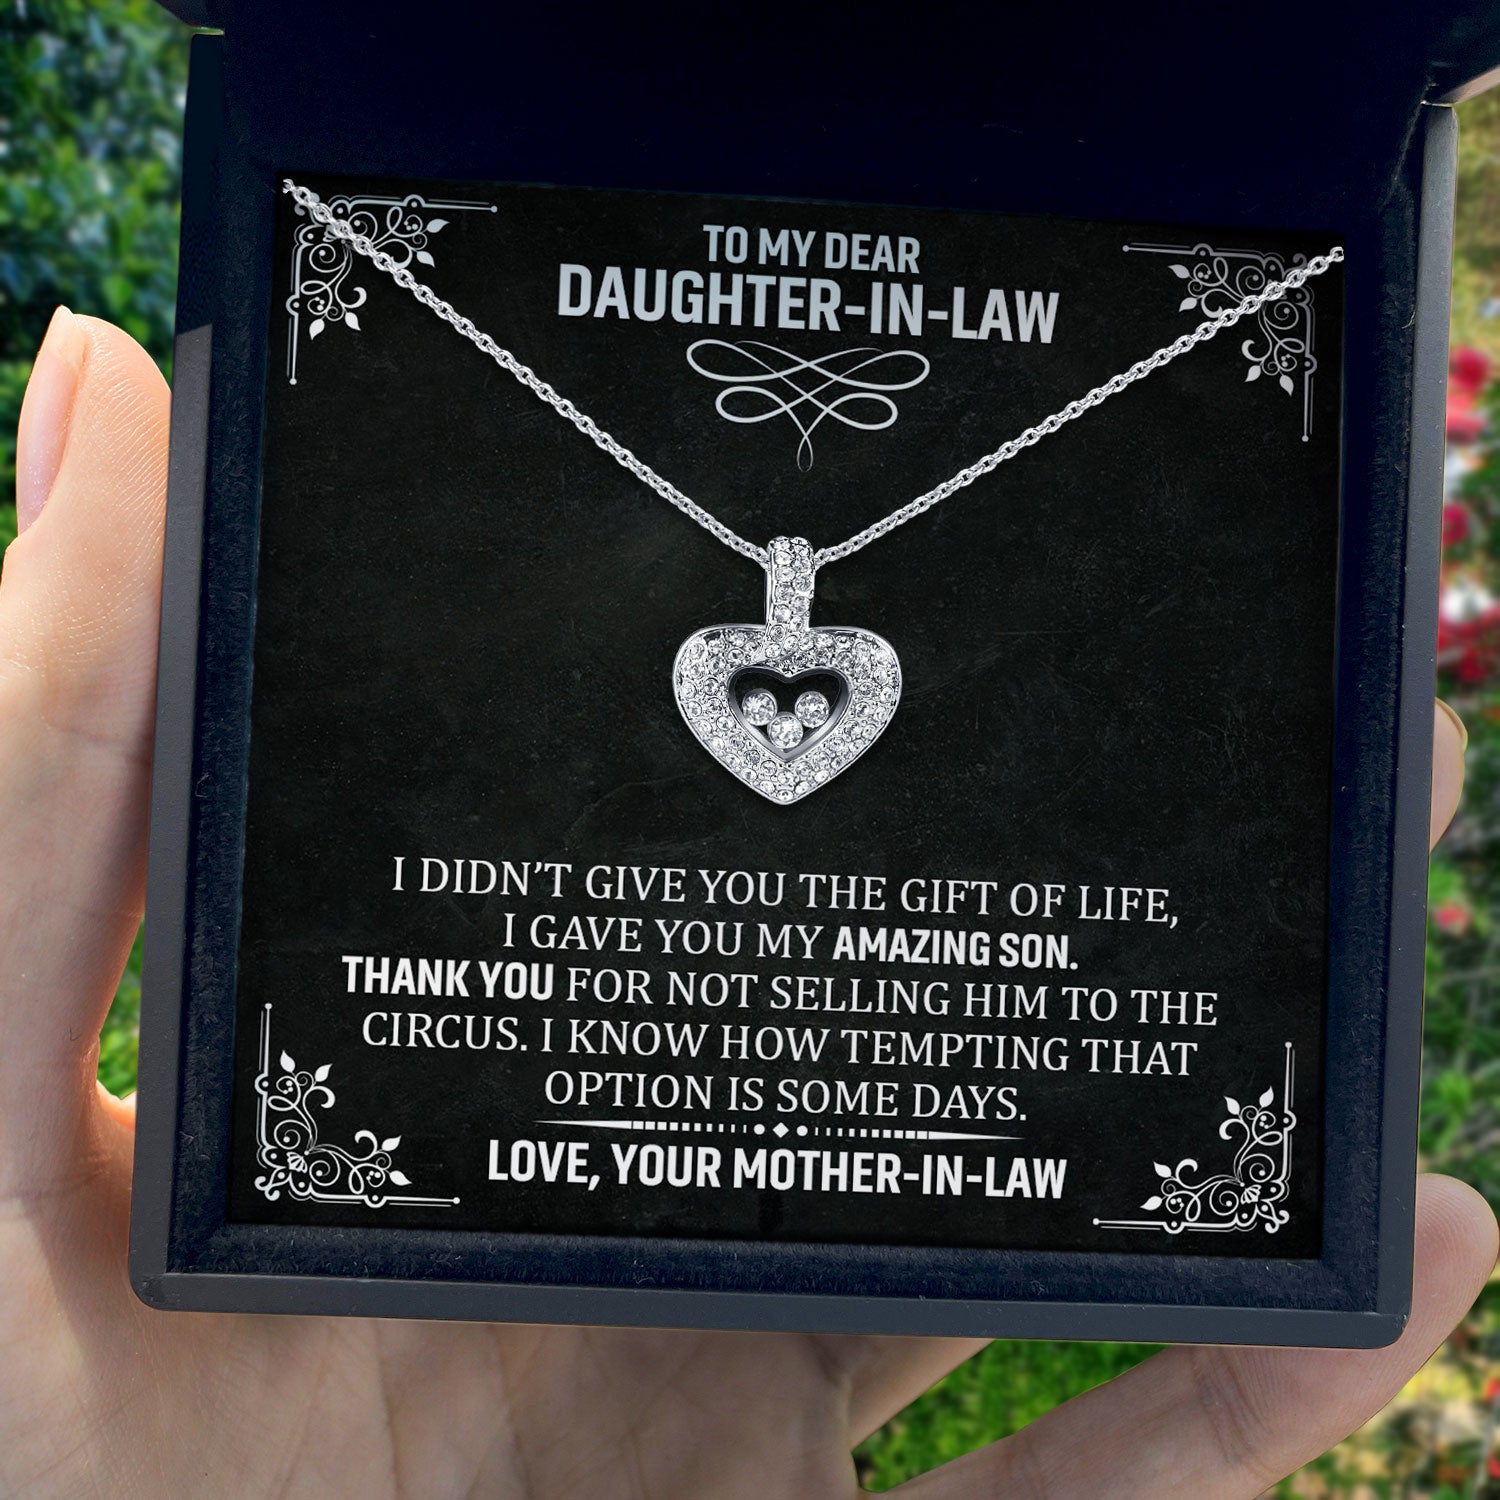 To My Dear Daughter-in-Law - Love, Mother-in-Law - Tryndi Floating Heart Necklace